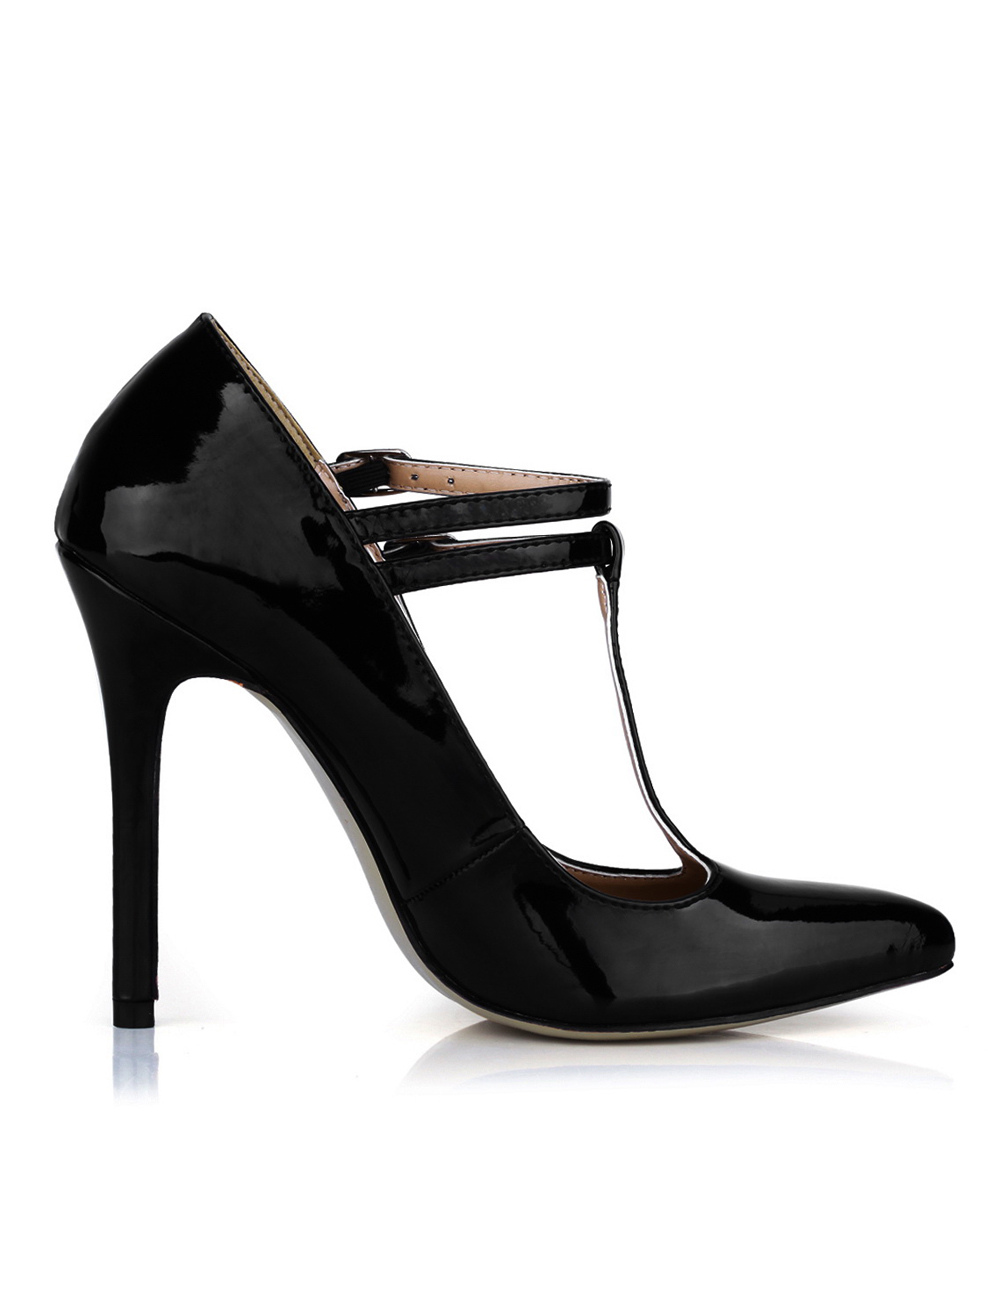 Black Pointed Toe T-strap Patent Leather High Heels for Woman - Milanoo.com